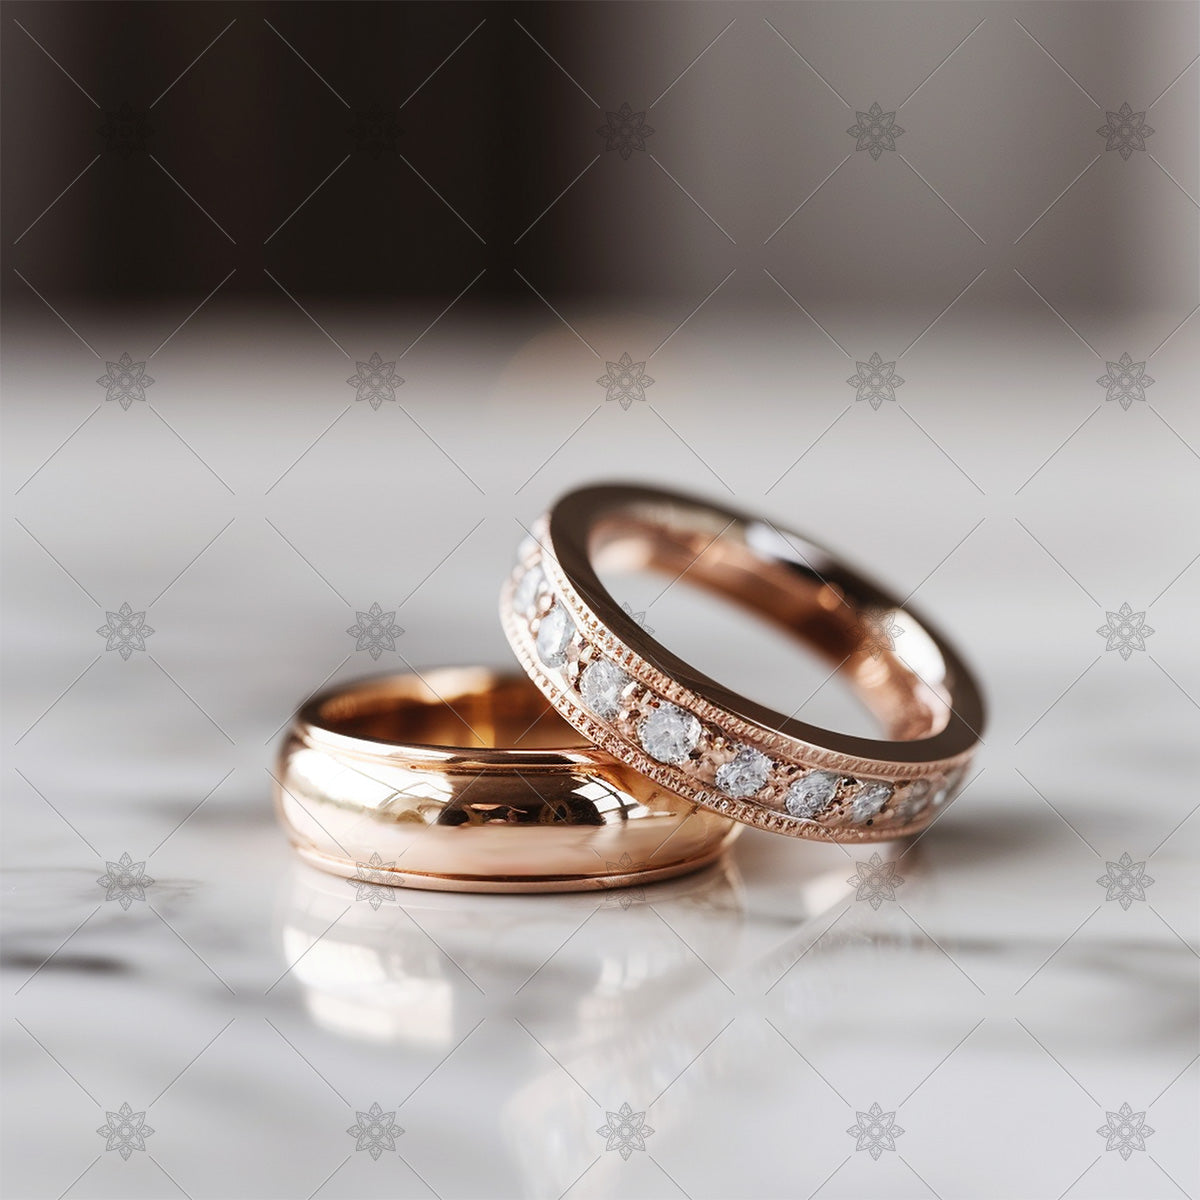 Gold Wedding Rings. Pair of gold wedding rings handcrafted , #Aff, #Rings,  #Pair, #Gold, #Wedding… | Couple wedding rings, Ring pillow wedding, Wedding  ring designs